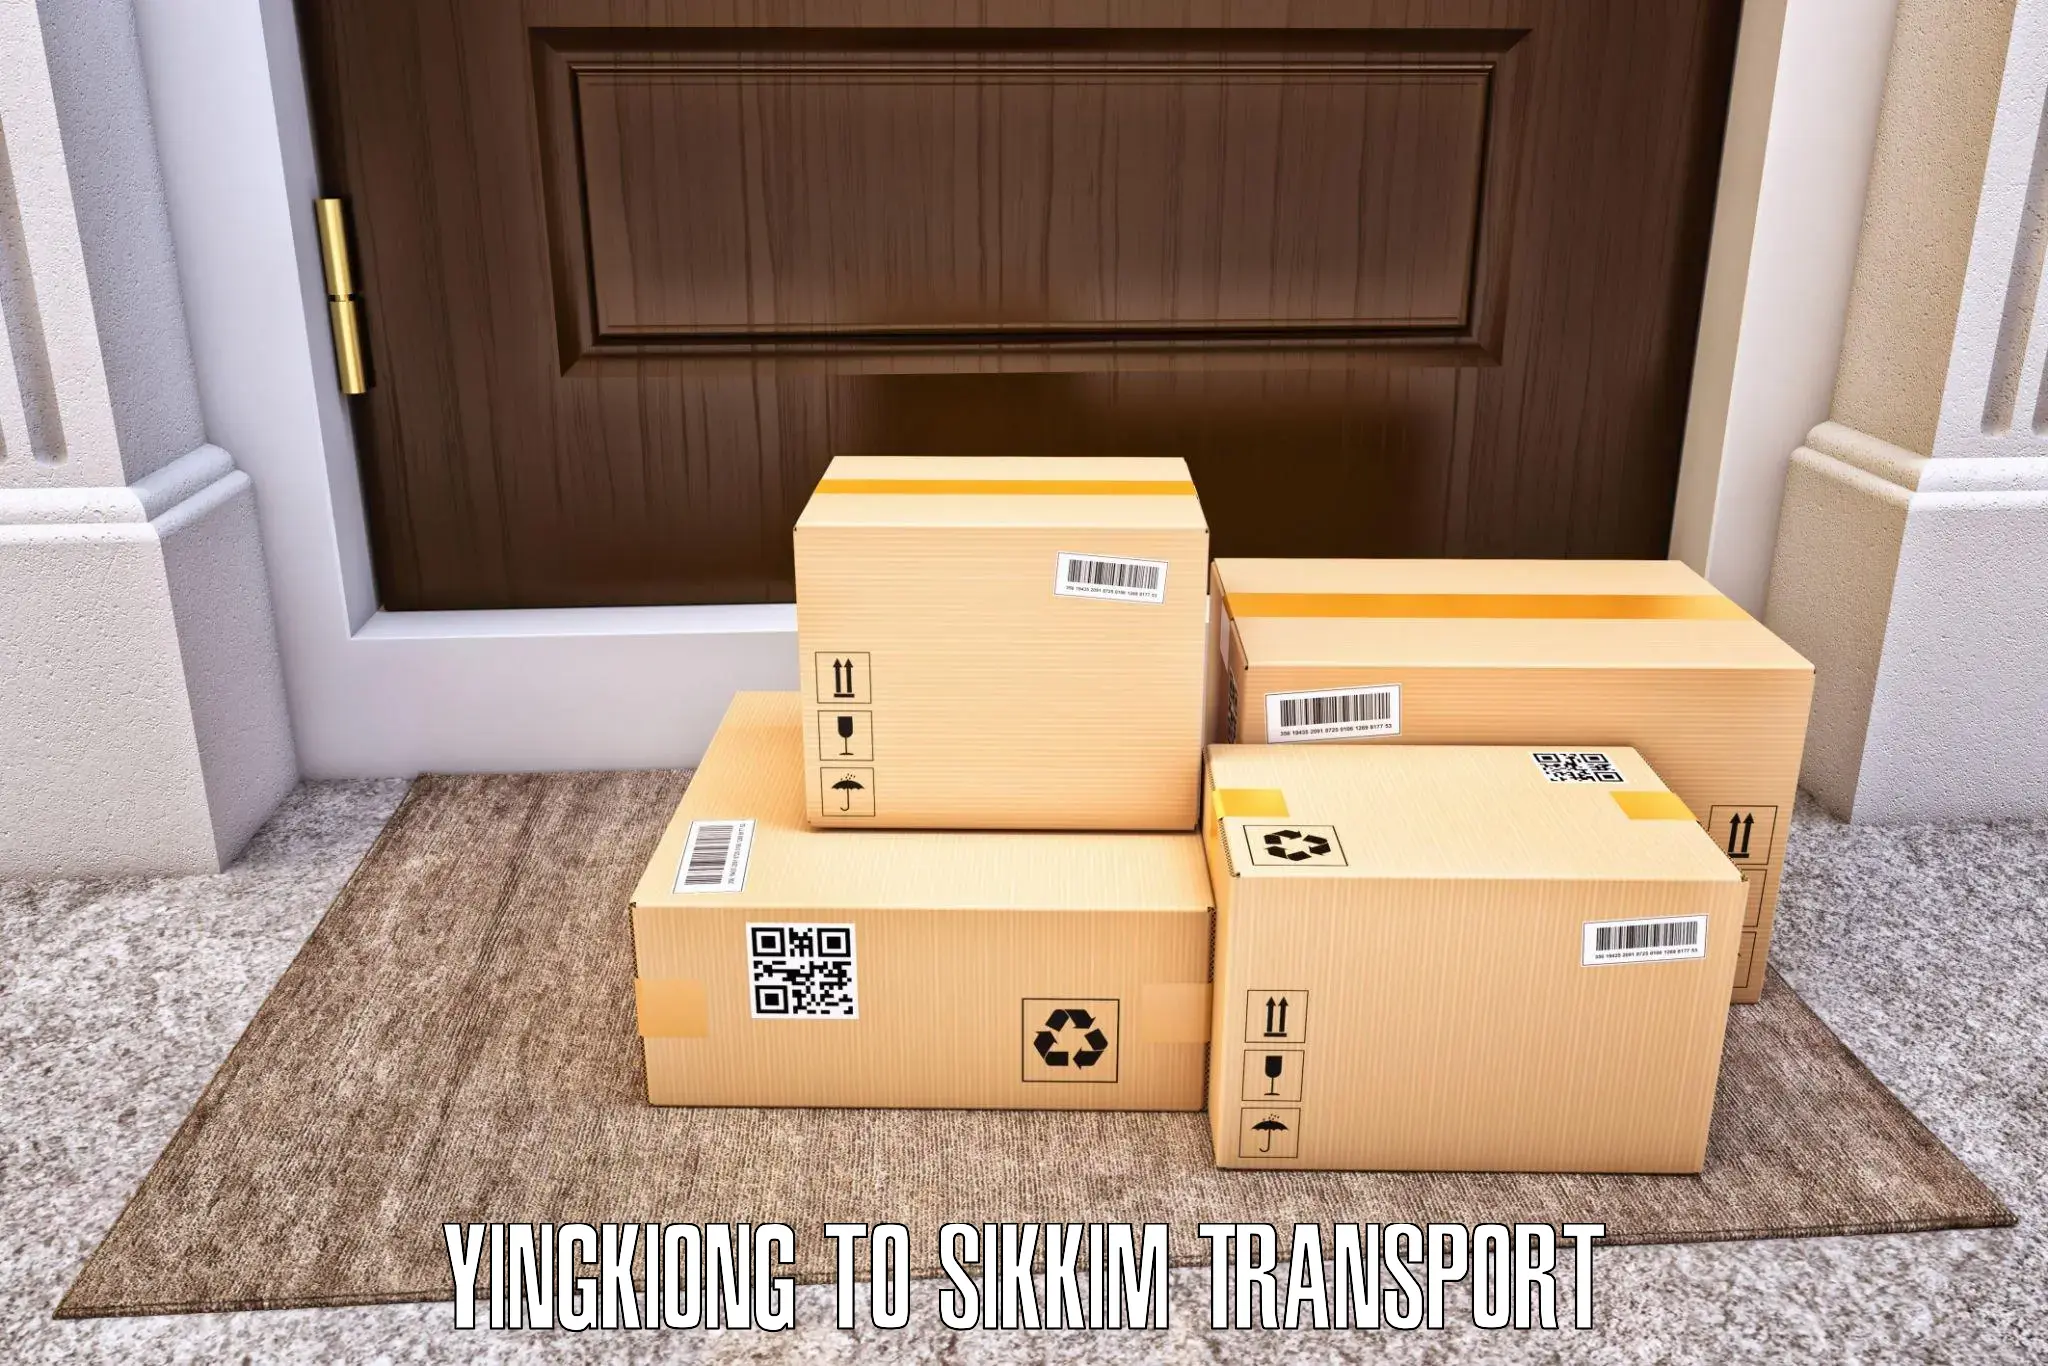 Daily transport service Yingkiong to Geyzing